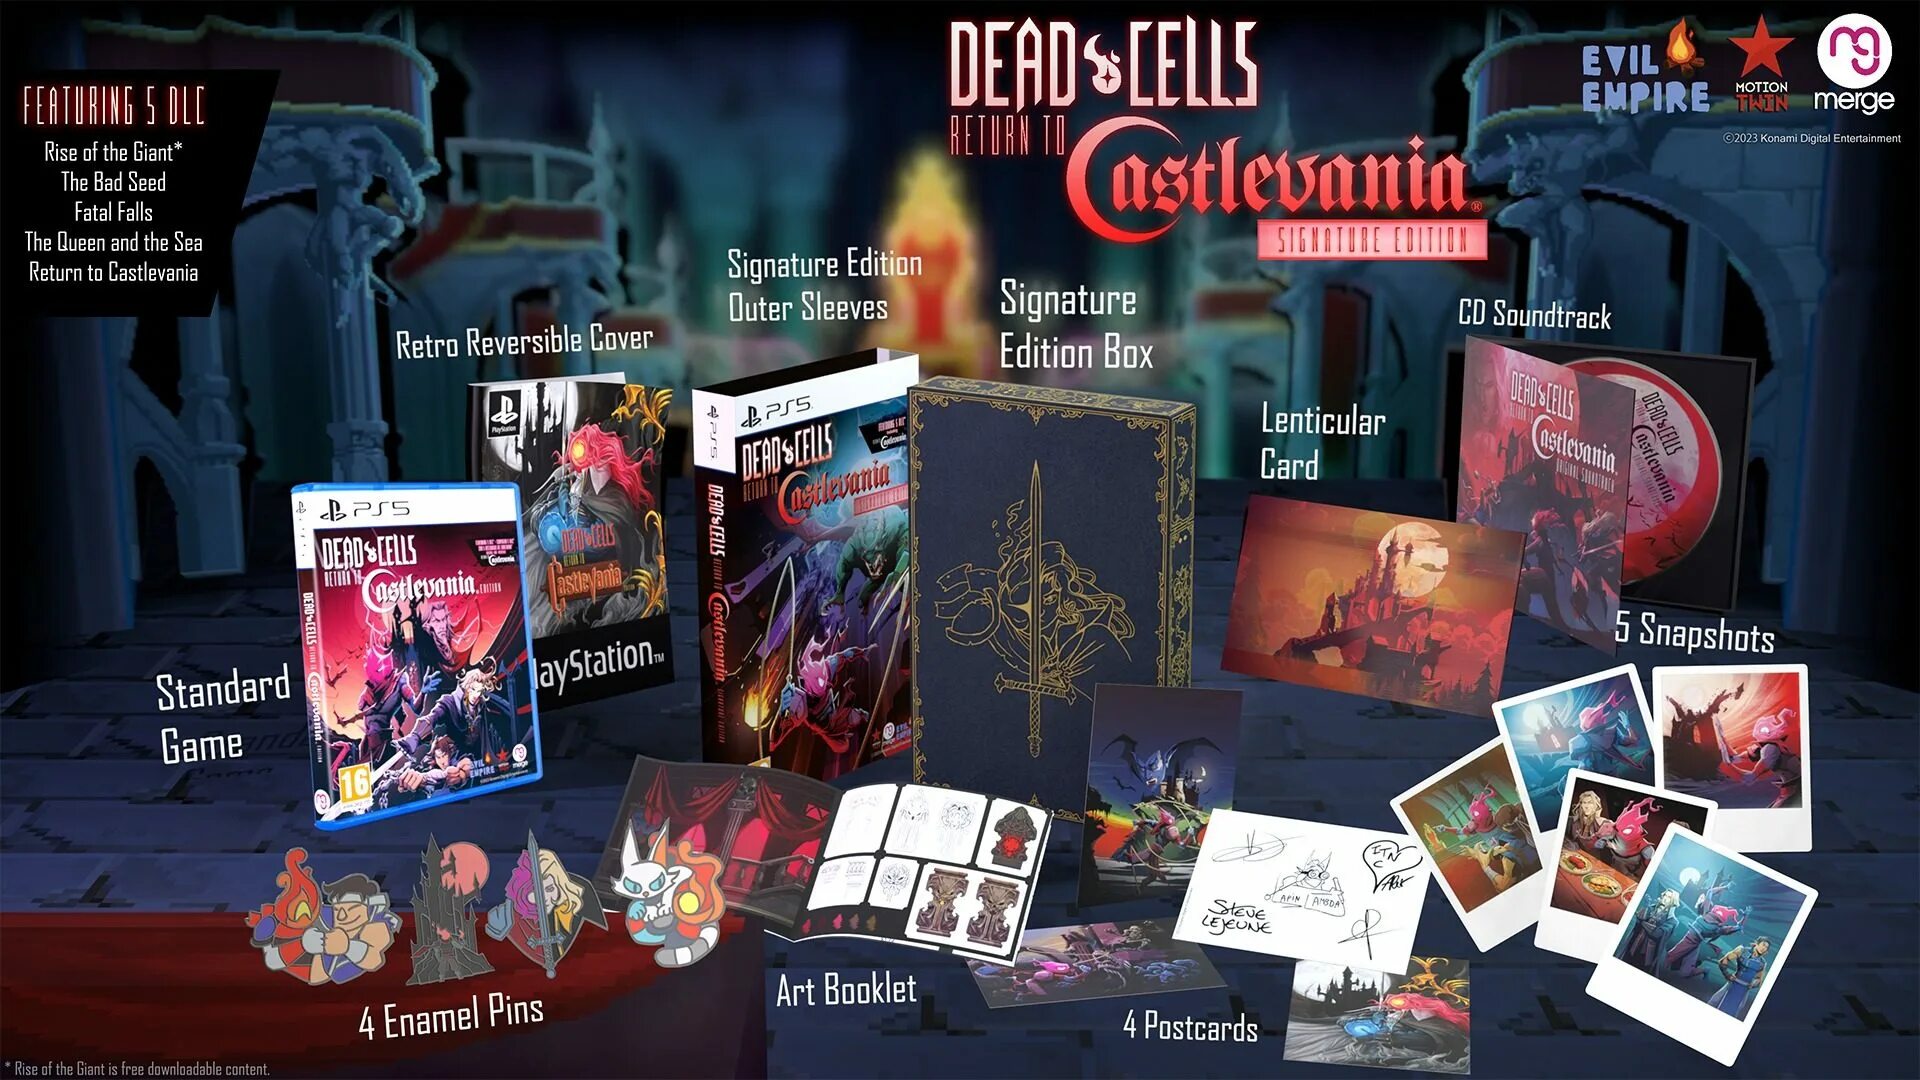 Dead Cells: Return to Castlevania Edition. Dead Cells Rise of the giant. Dead Cells Castlevania. Dead Cells the Bad Seeds.